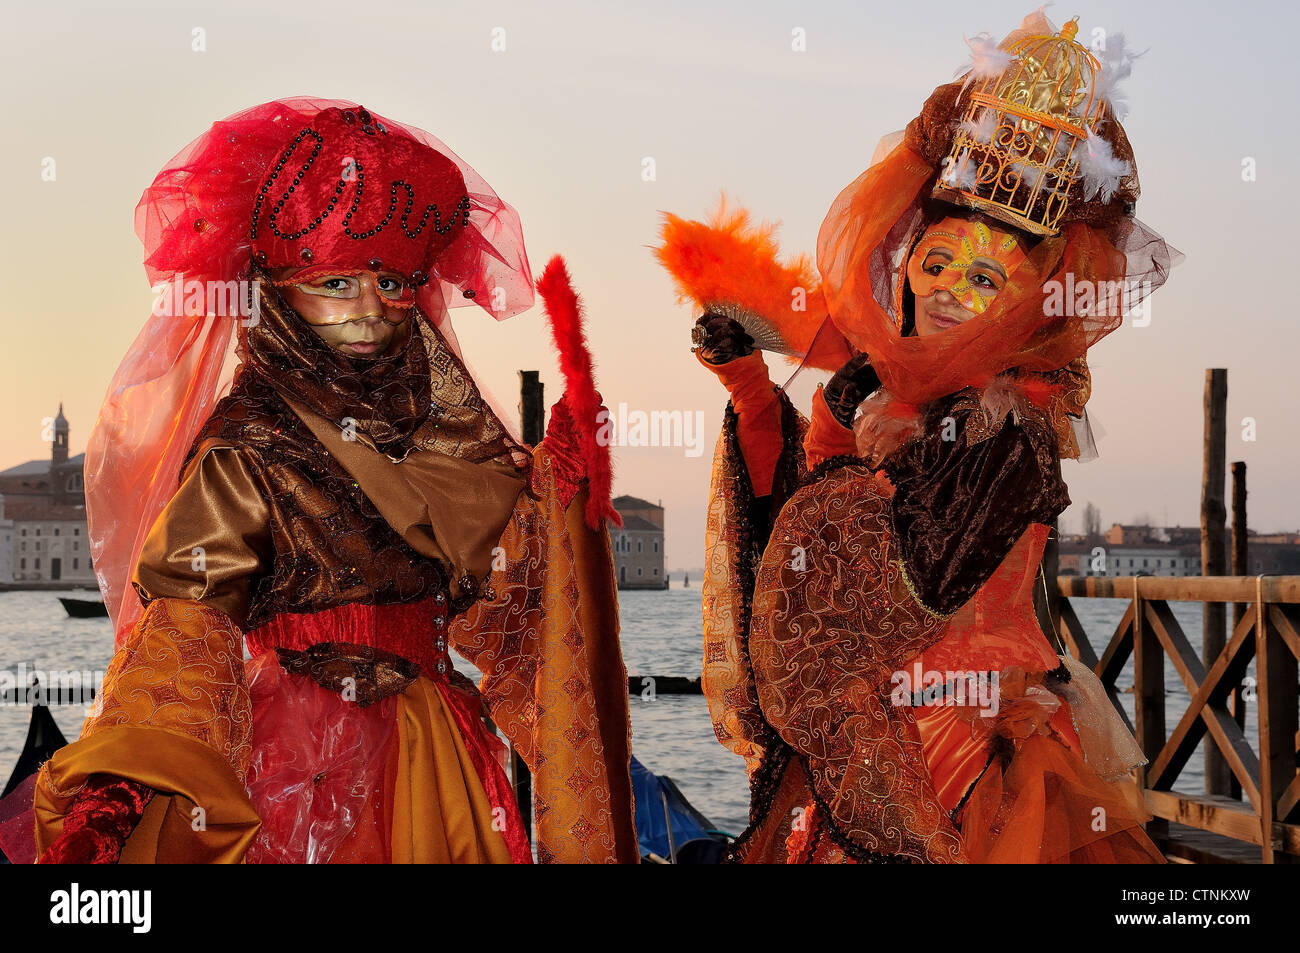 Masked participant during Carnival at sunrise in Piaza San Marco [St. Mark's Square], Venice Stock Photo